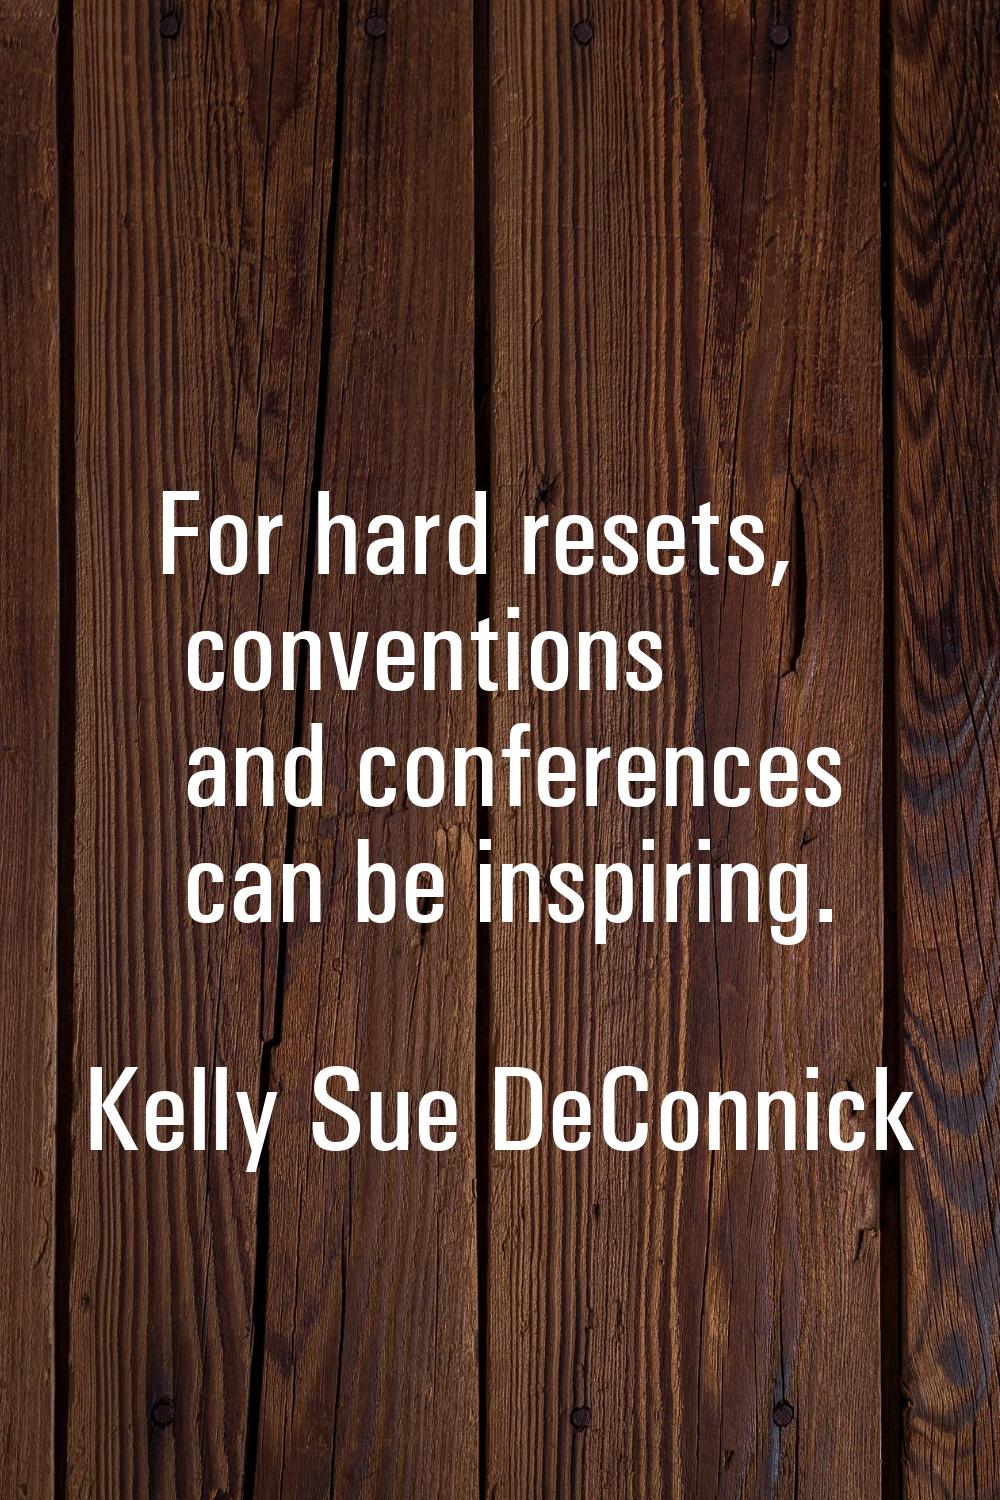 For hard resets, conventions and conferences can be inspiring.